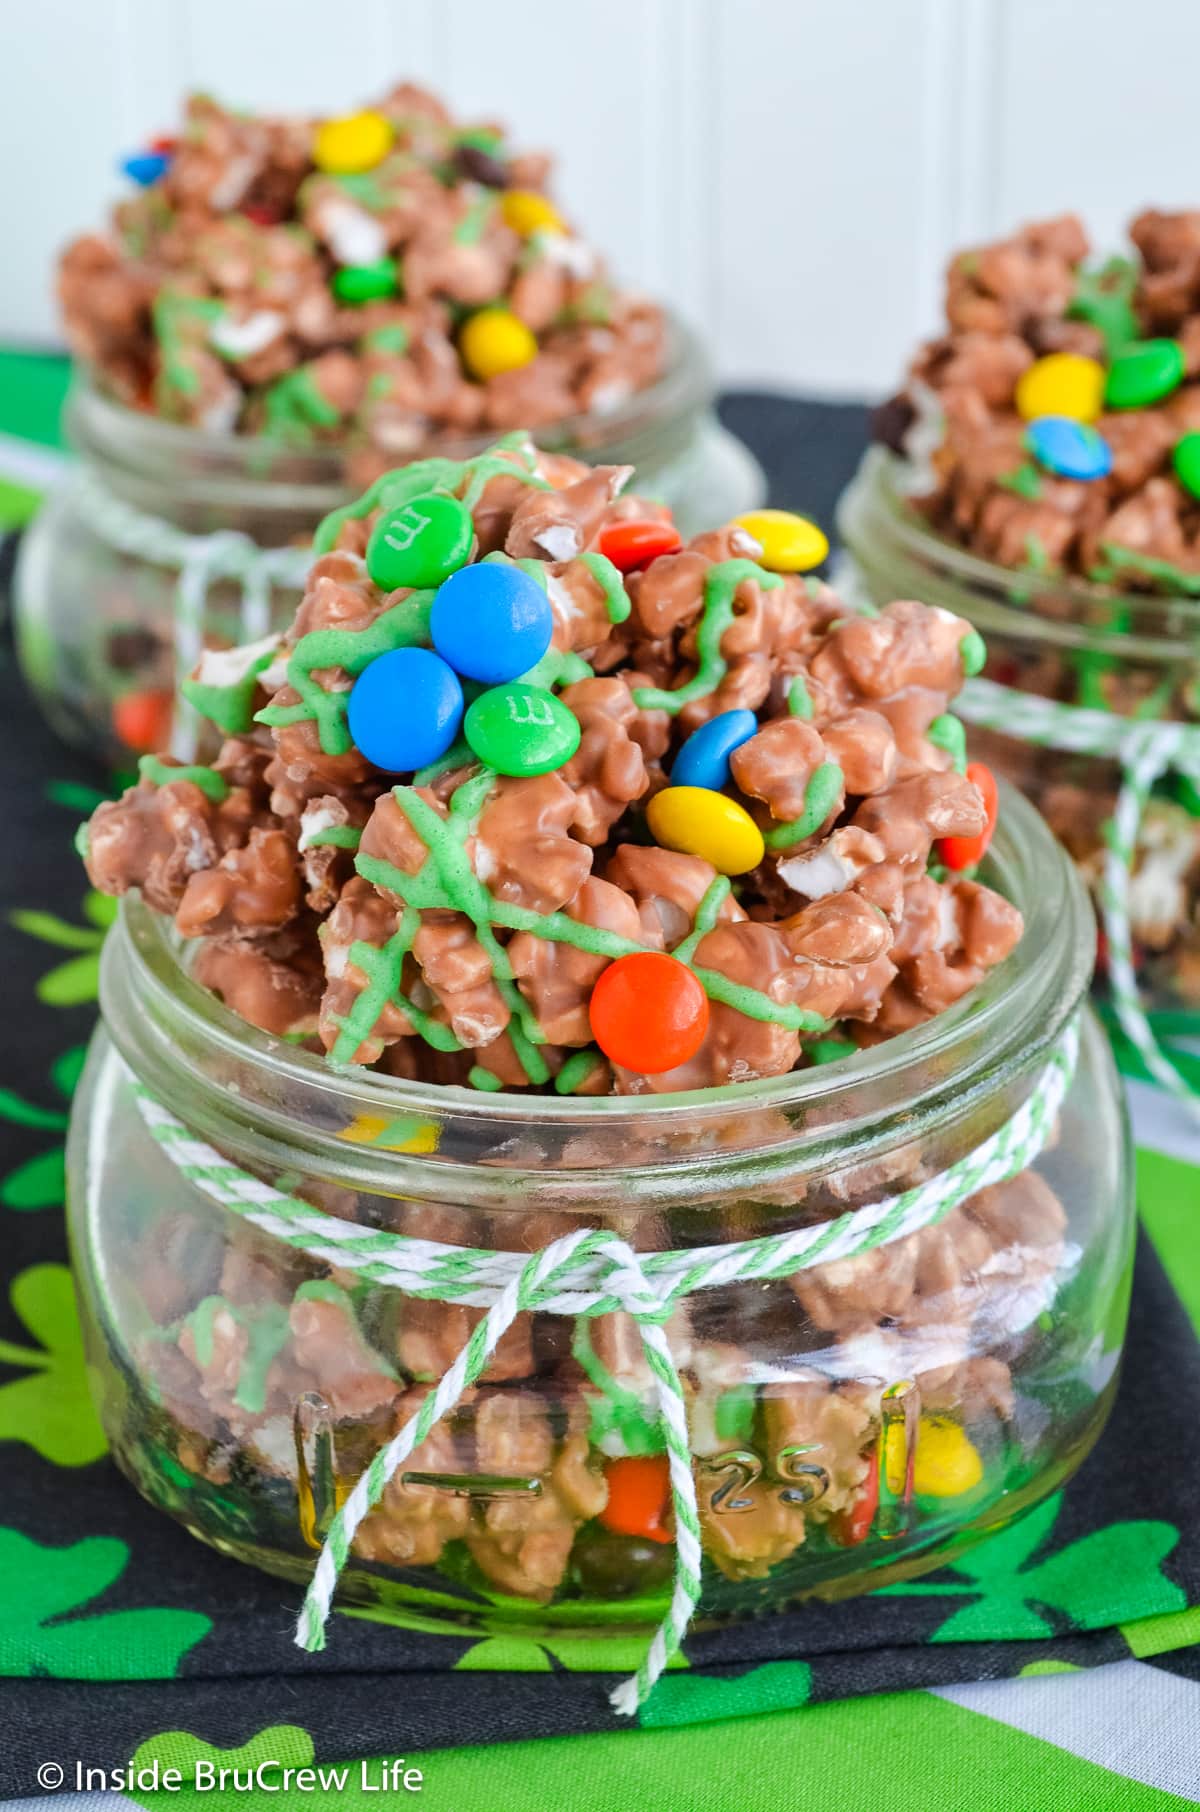 Jars filled with chocolate popcorn and candy.